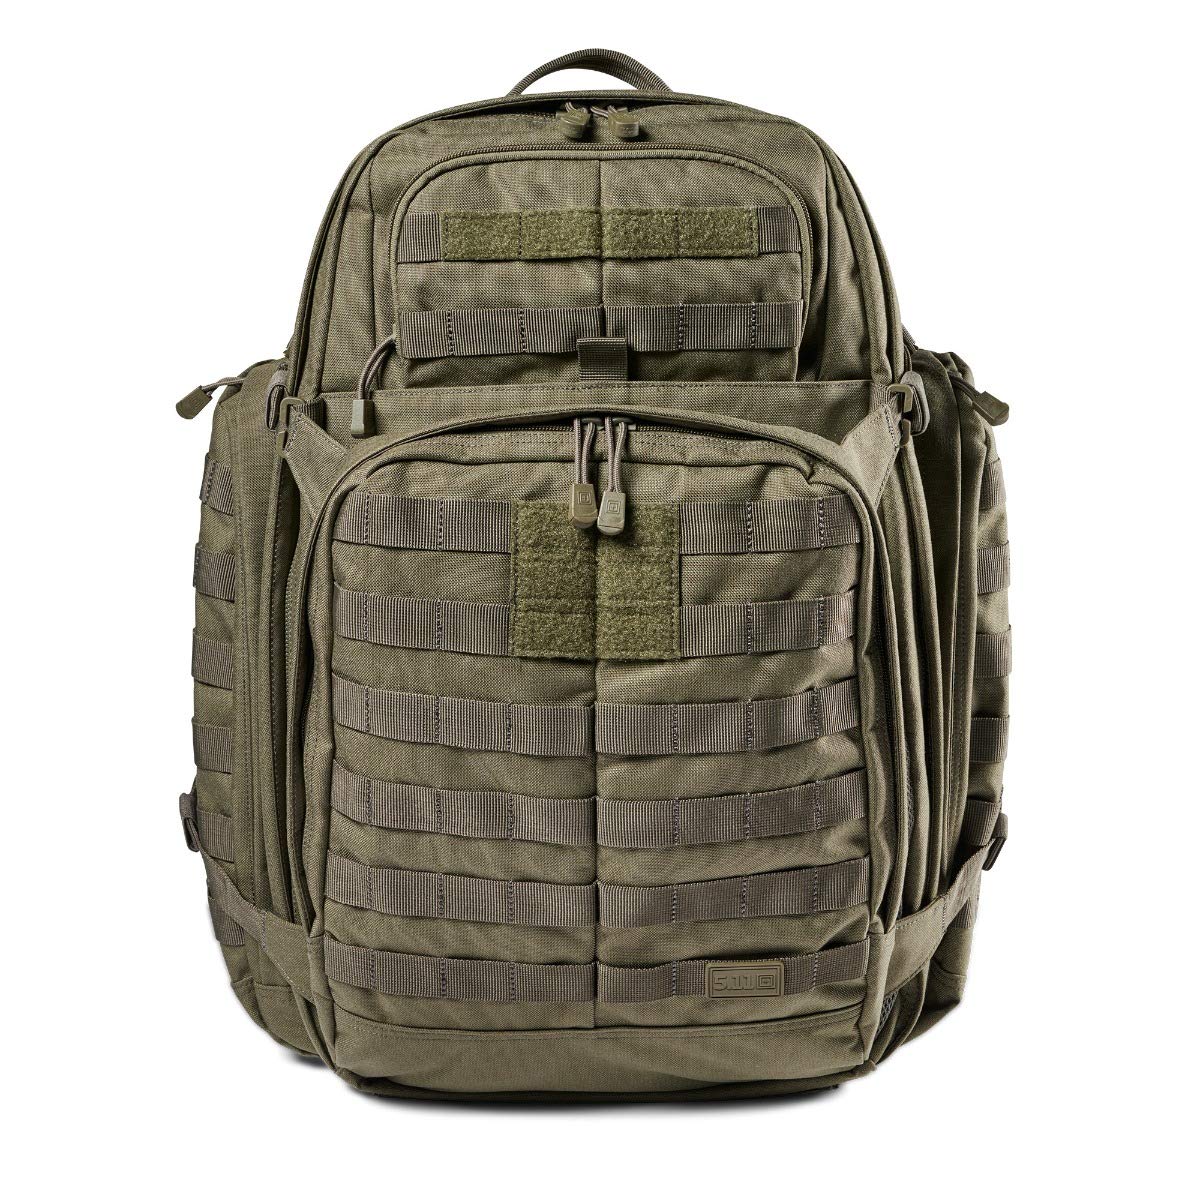 5.11 Tactical Backpack‚ Rush 72 2.0‚ Military Molle Pack, CCW and Laptop Compartment, 55 Liter, Large, Style 56565‚ Ranger Green